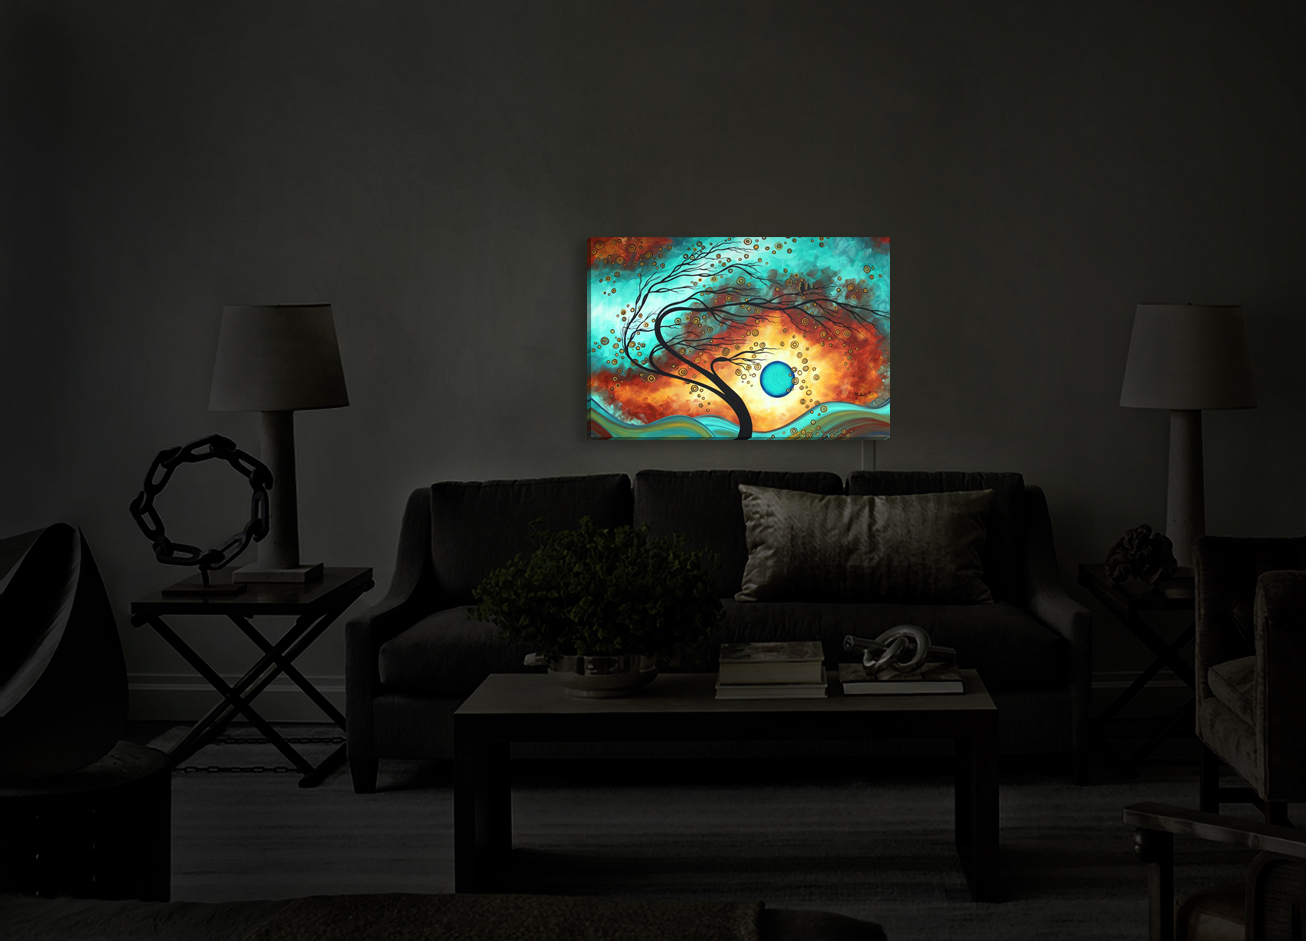 Introducing Illuminated Wall Art to Enjoy 24 Hours a Day. Art That Doubles as a Light from